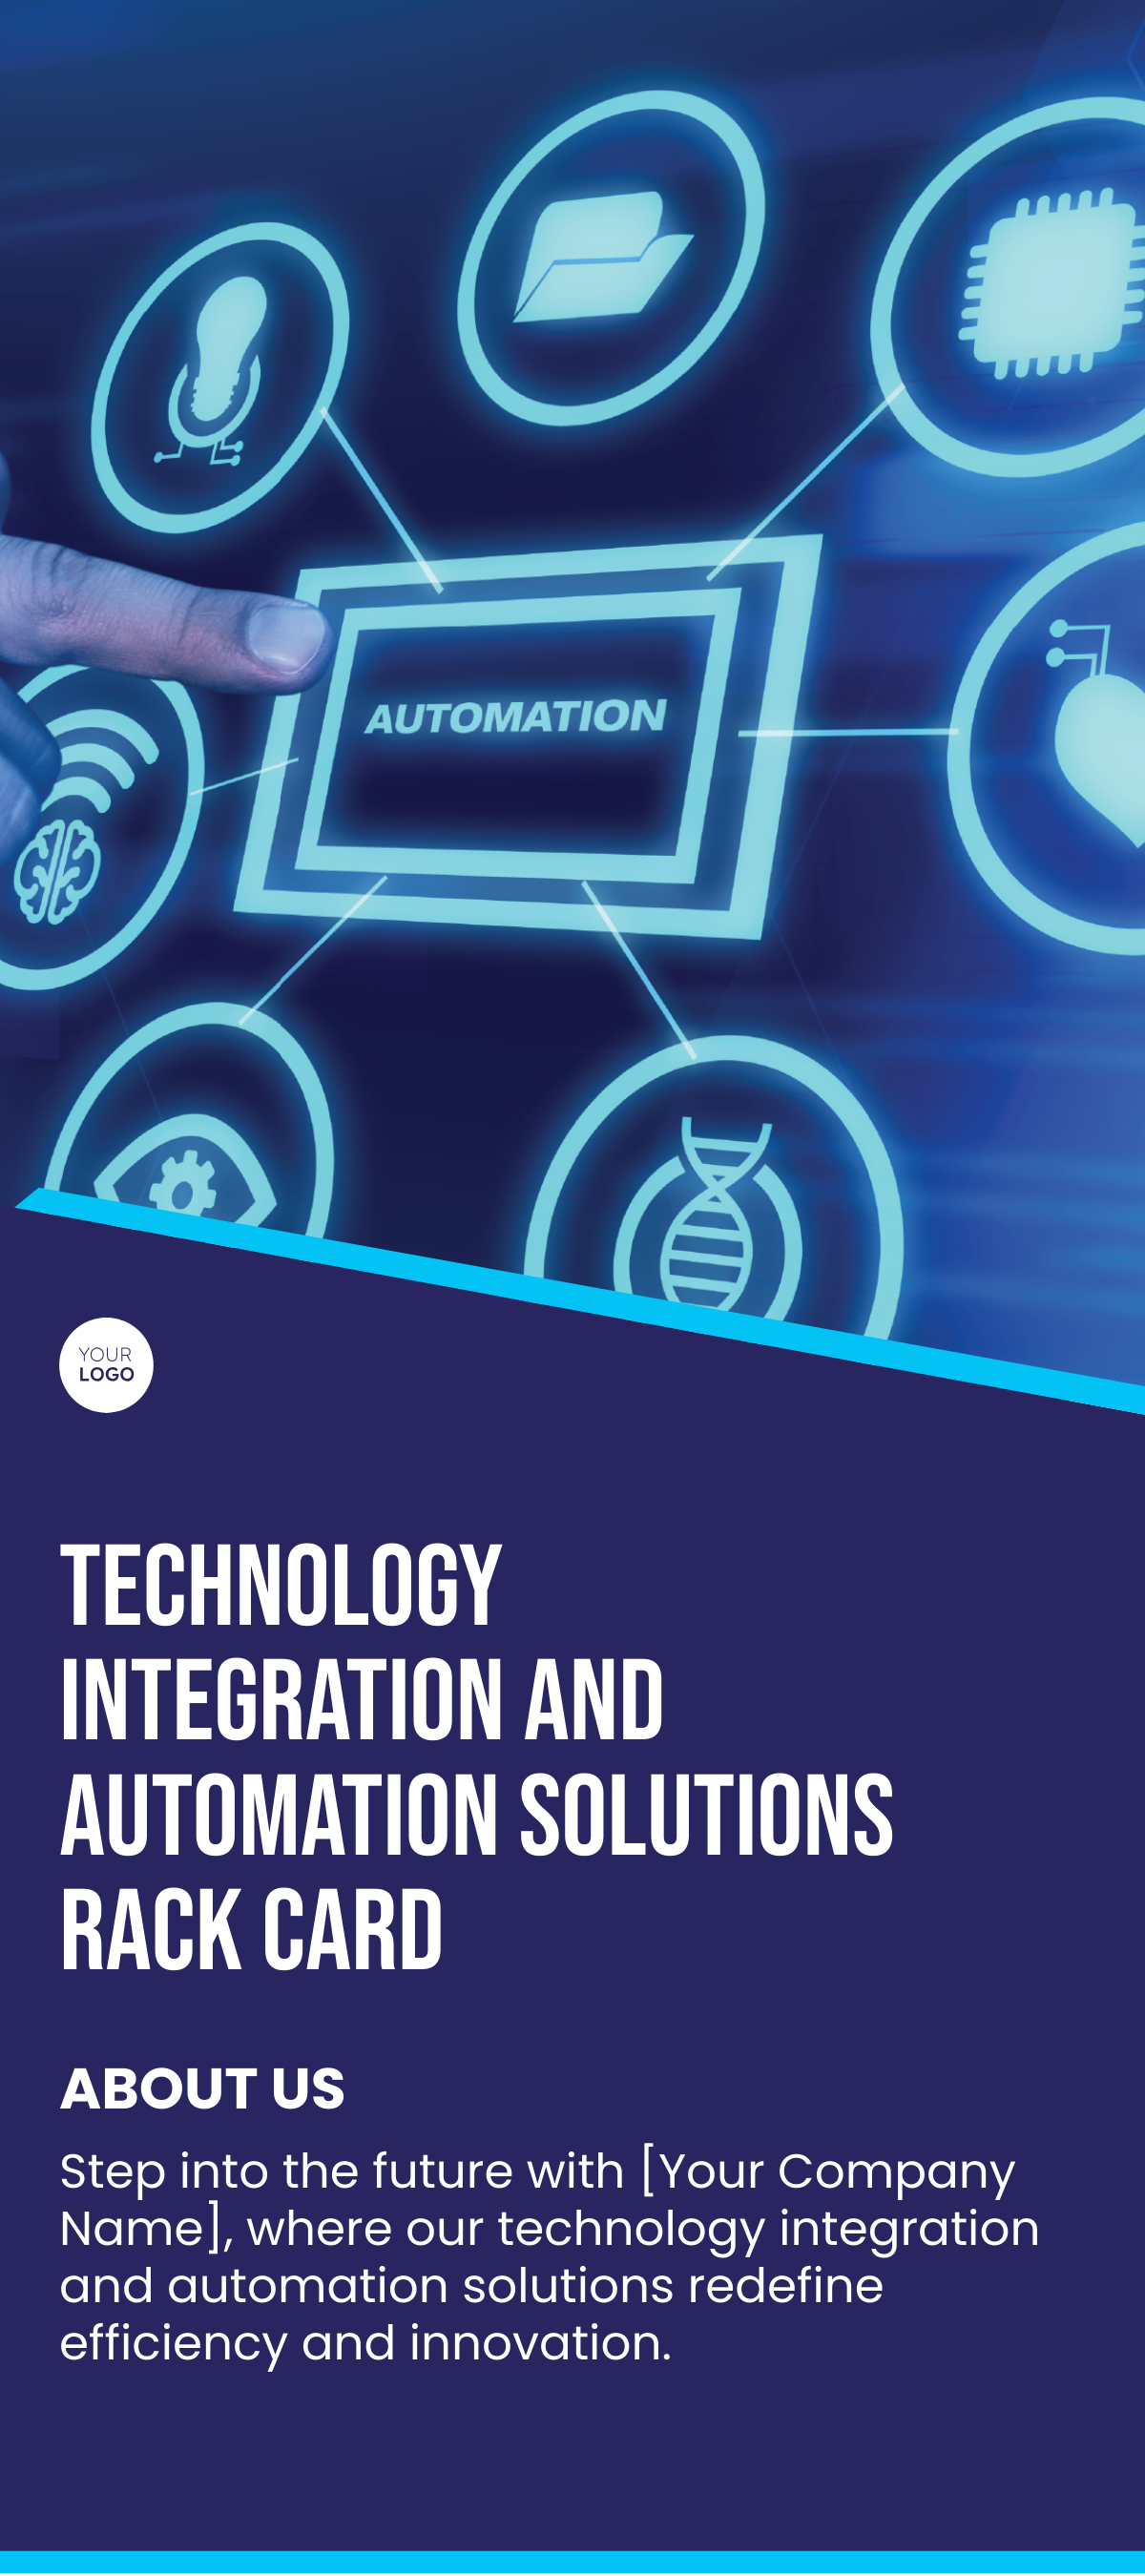 Technology Integration and Automation Solutions Rack Card Template